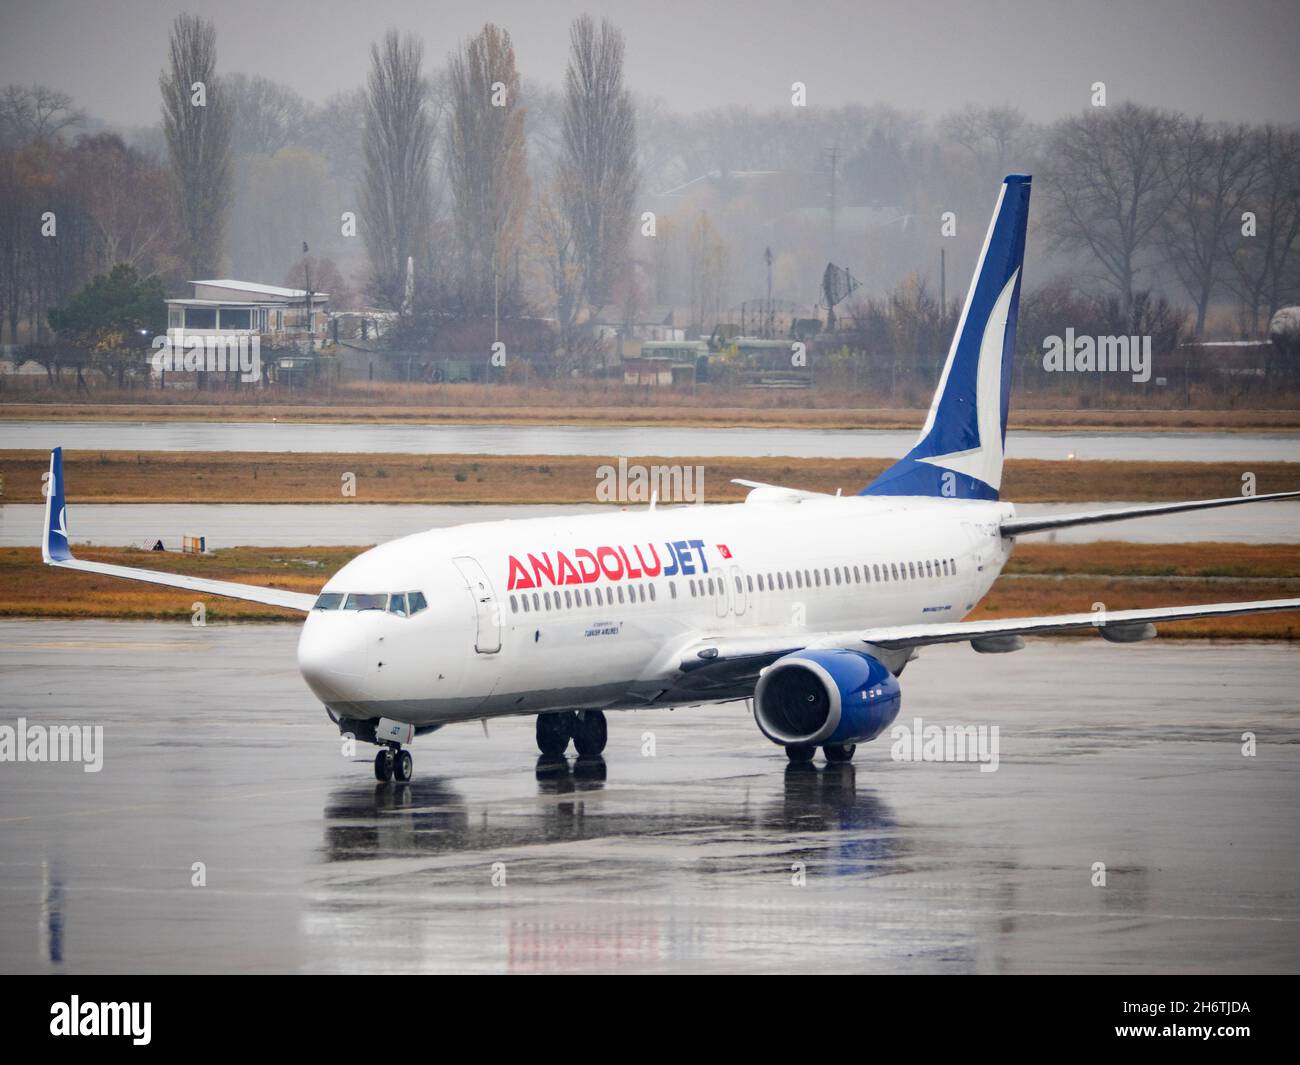 An Anadolu aircraft at Boryspil Airport. Since the beginning of 2021, Boryspil Airport has served more than 8 million passengers. Passenger traffic recovered by 71% compared to pre-crisis figures in October 2019. Stock Photo